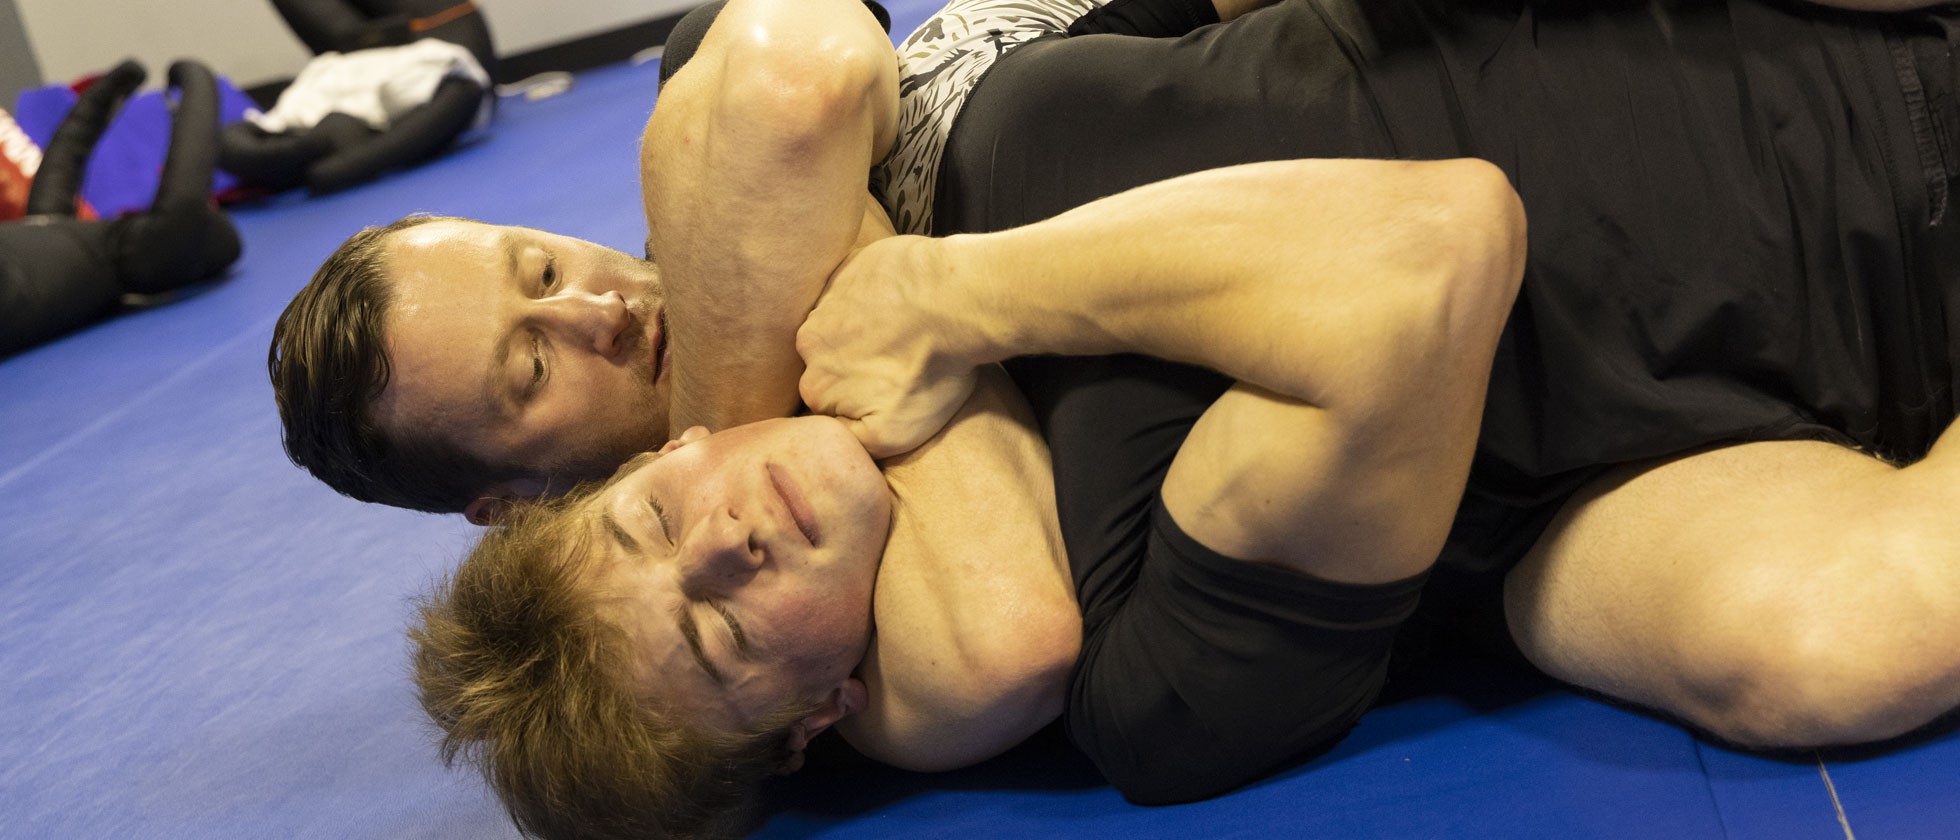 A Jiu Jitsu Academy That Can Help You Lose Weight and Get Fit